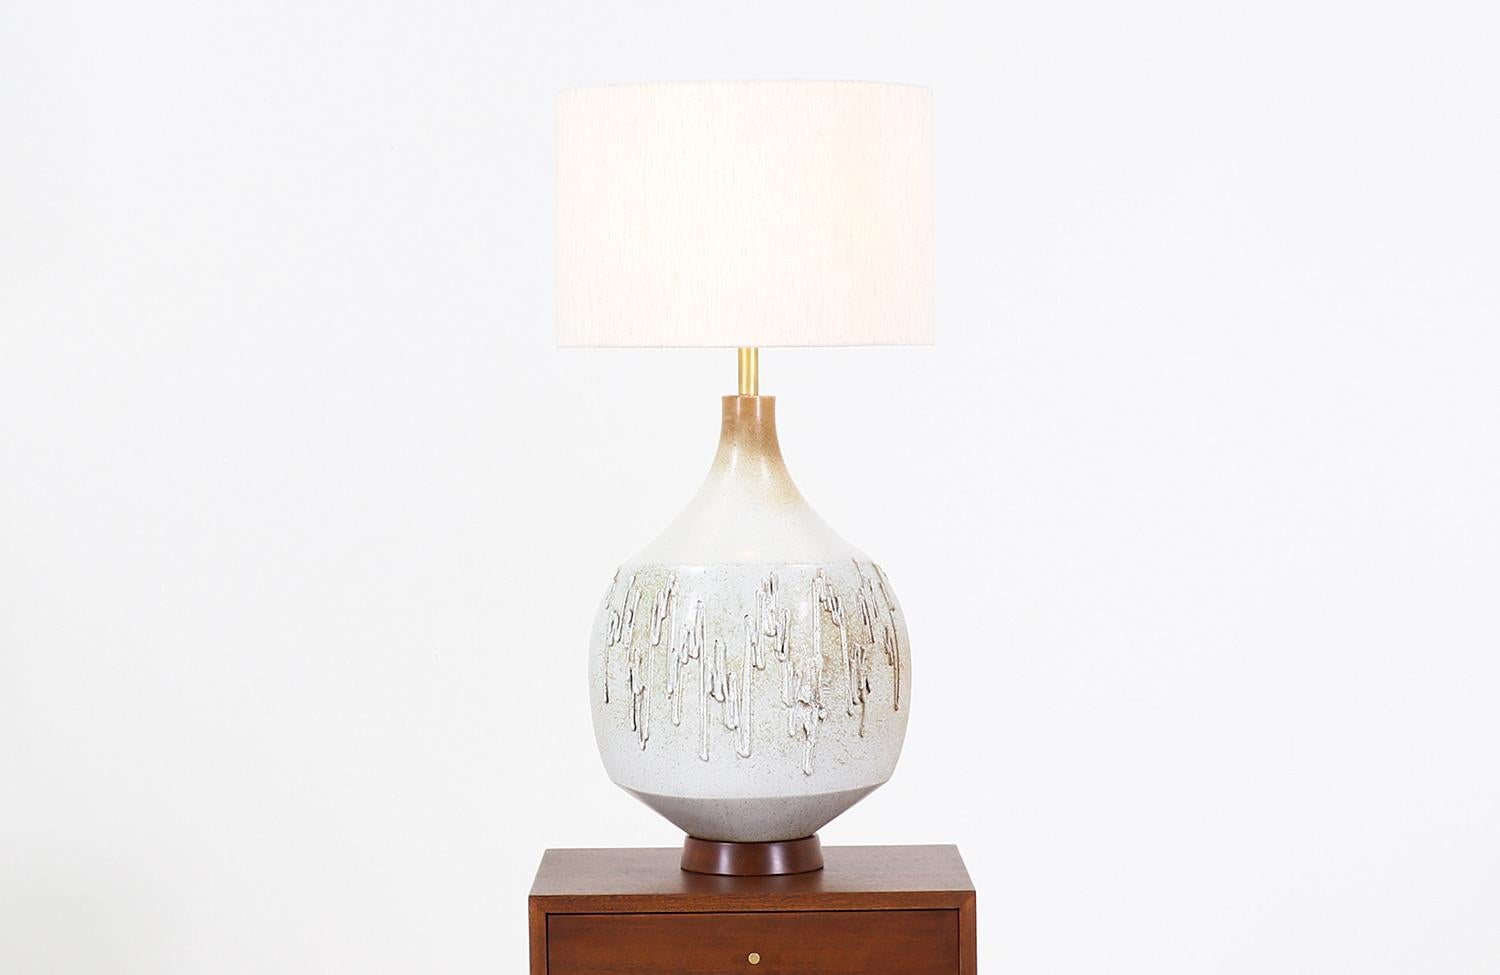 Ceramic table lamp designed by David Cressey for Architectural Pottery in the United States in the 1960s. Crafted with ceramic, this table lamp has an oblong body with prominent drip texture and a mix of colors that contrast beautifully with the